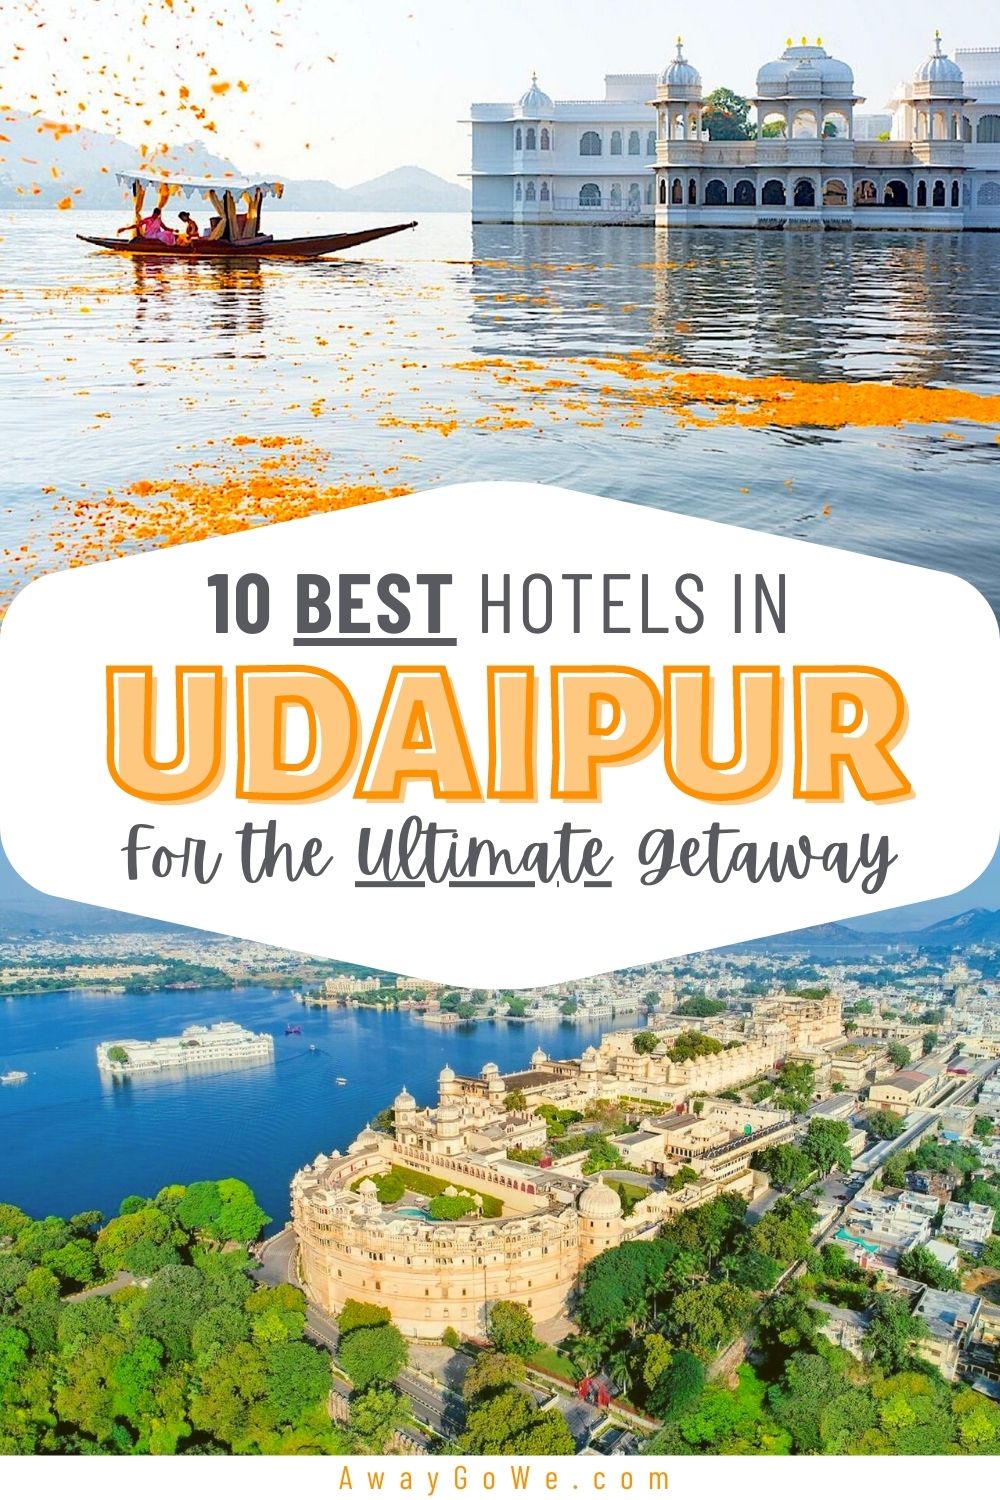 10 Best Hotels in Udaipur for the Ultimate Getaway (2022)